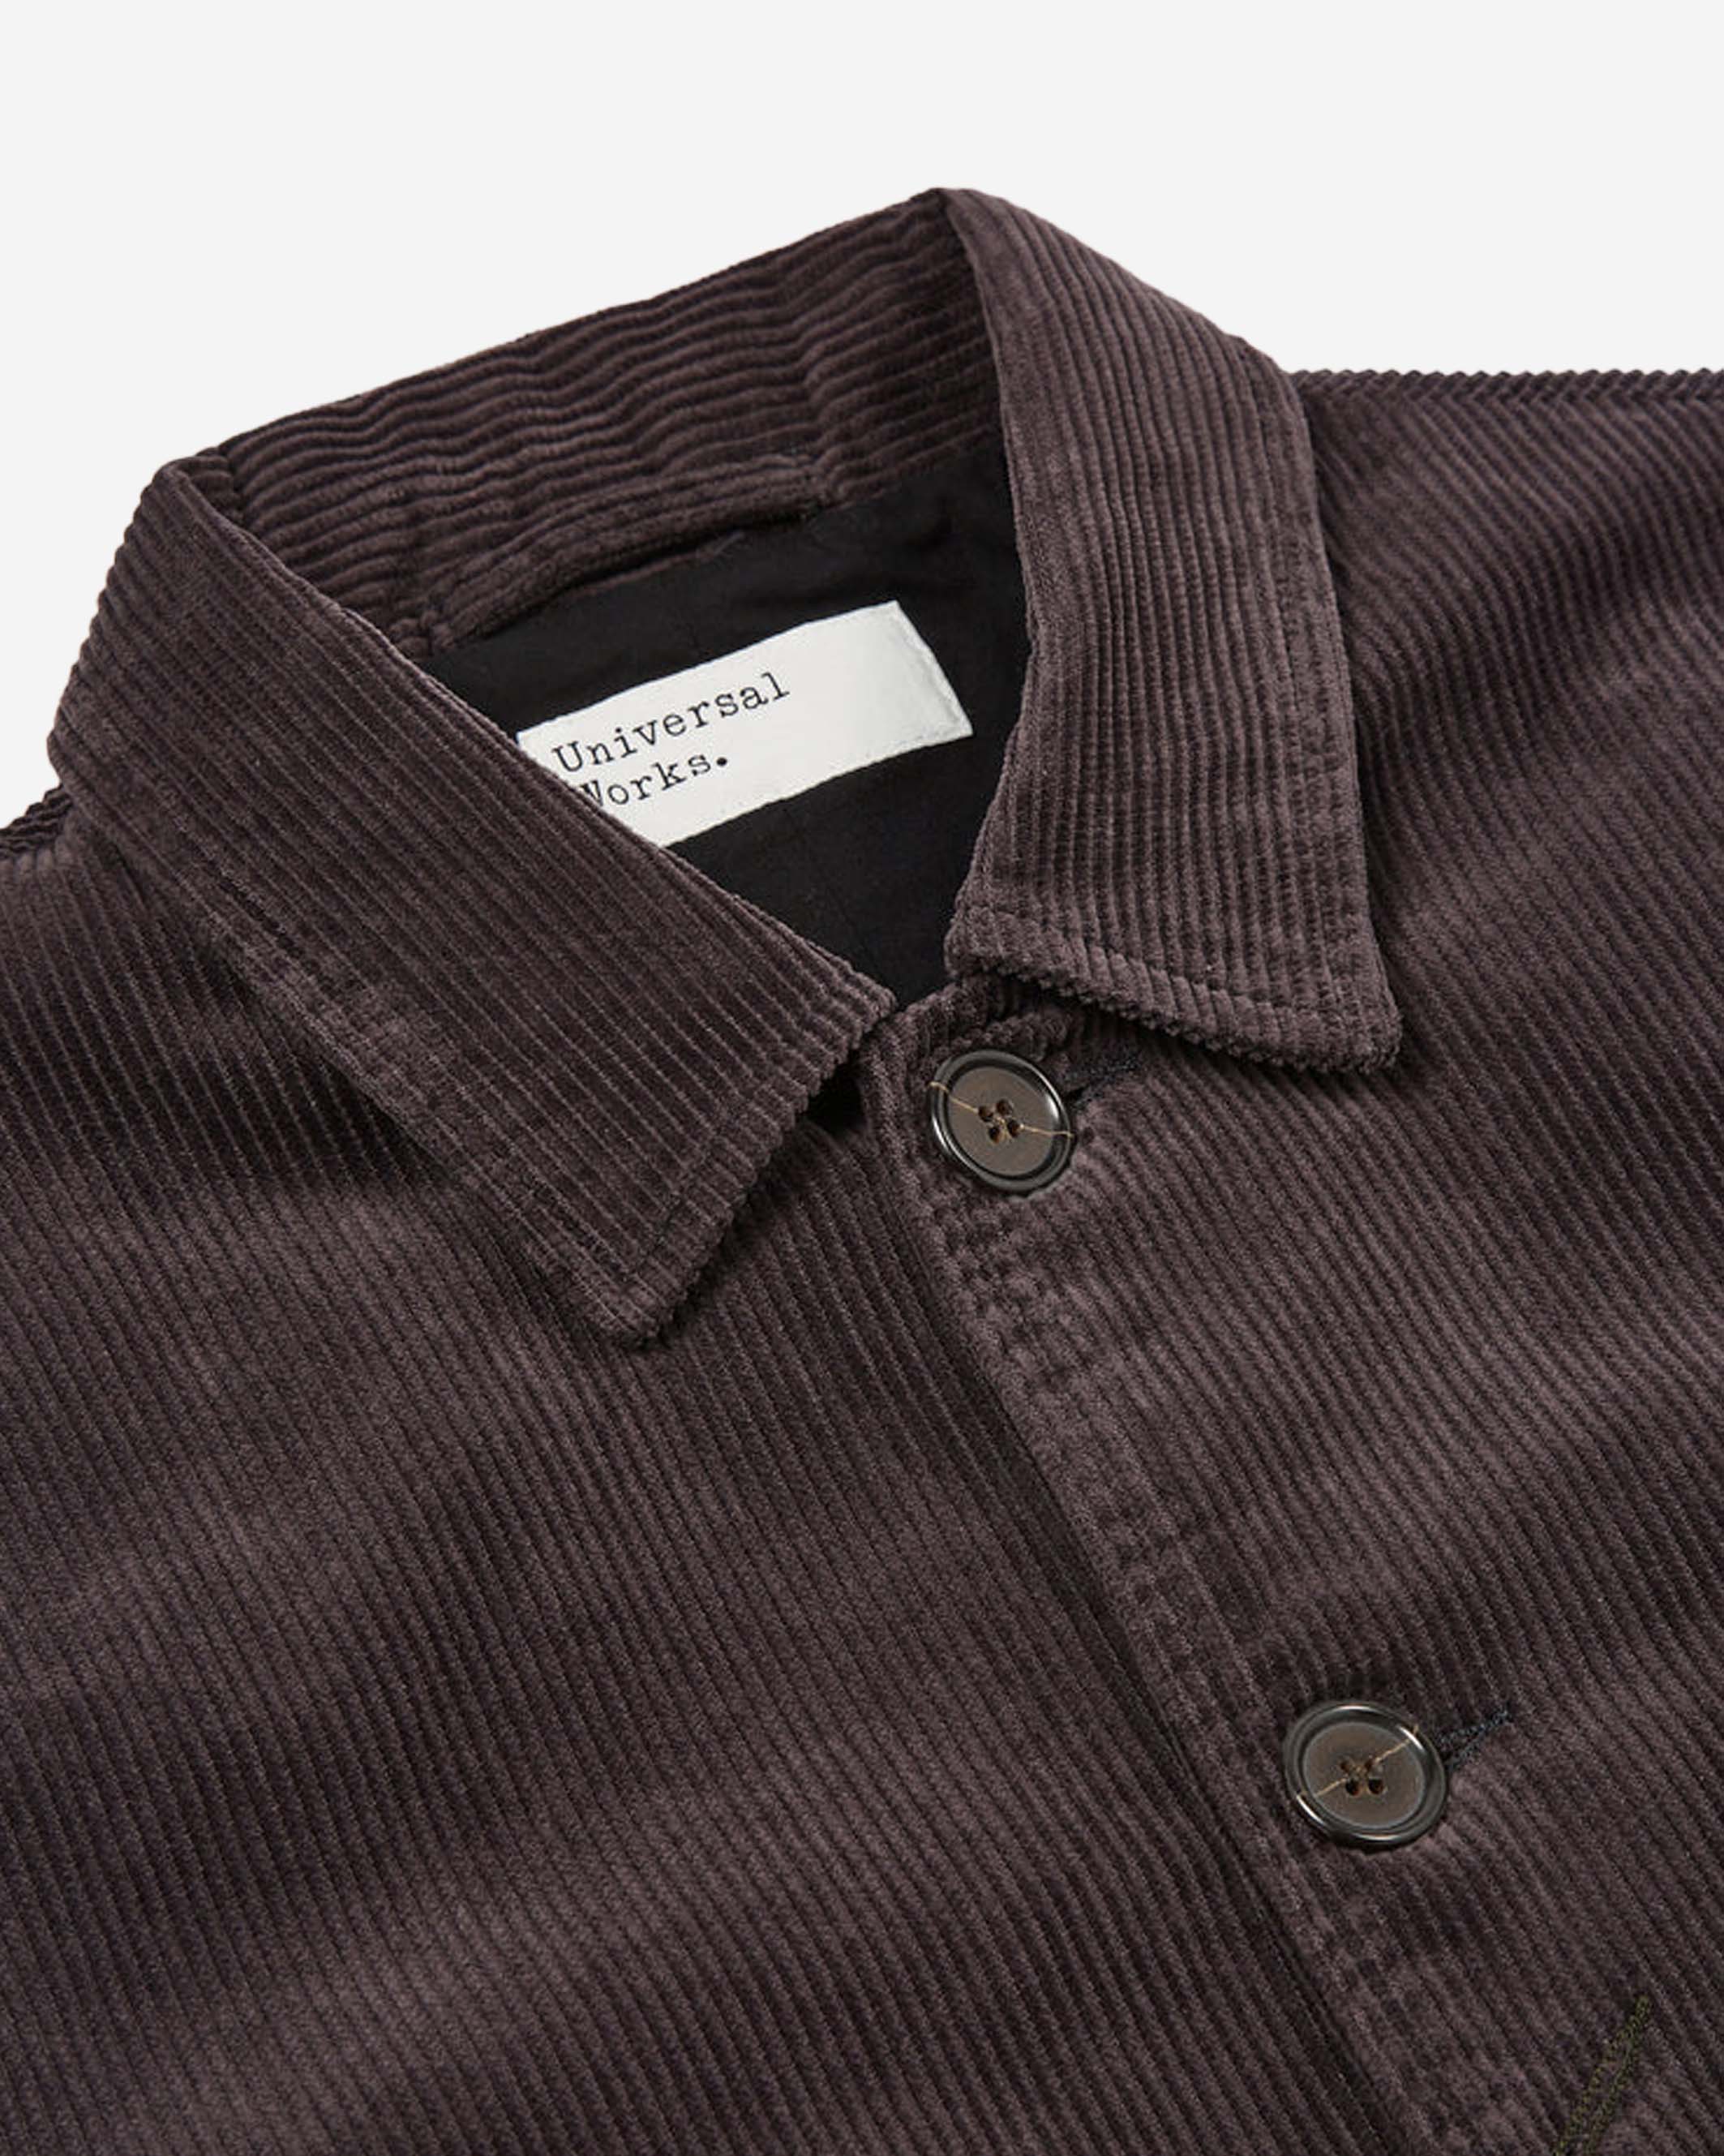 Corduroy or 'cord-du-roi' is the fabric of kings. We use it every autumn-winter season, and it is now established as a Universal Works classic. Made here in 100% cotton, it is soft, wearable, and colour-dyed to give a rich lively finish. • Regular fit. • Five-button front. • Two lower patch pockets. • One chest patch pocket. • Two internal pockets. • Fabric Content: 100% Cotton. • Washcare: Wash at 30 degrees. Do not bleach. Do not tumble dry. Cool iron. Do not dry clean. Wash like colours together.